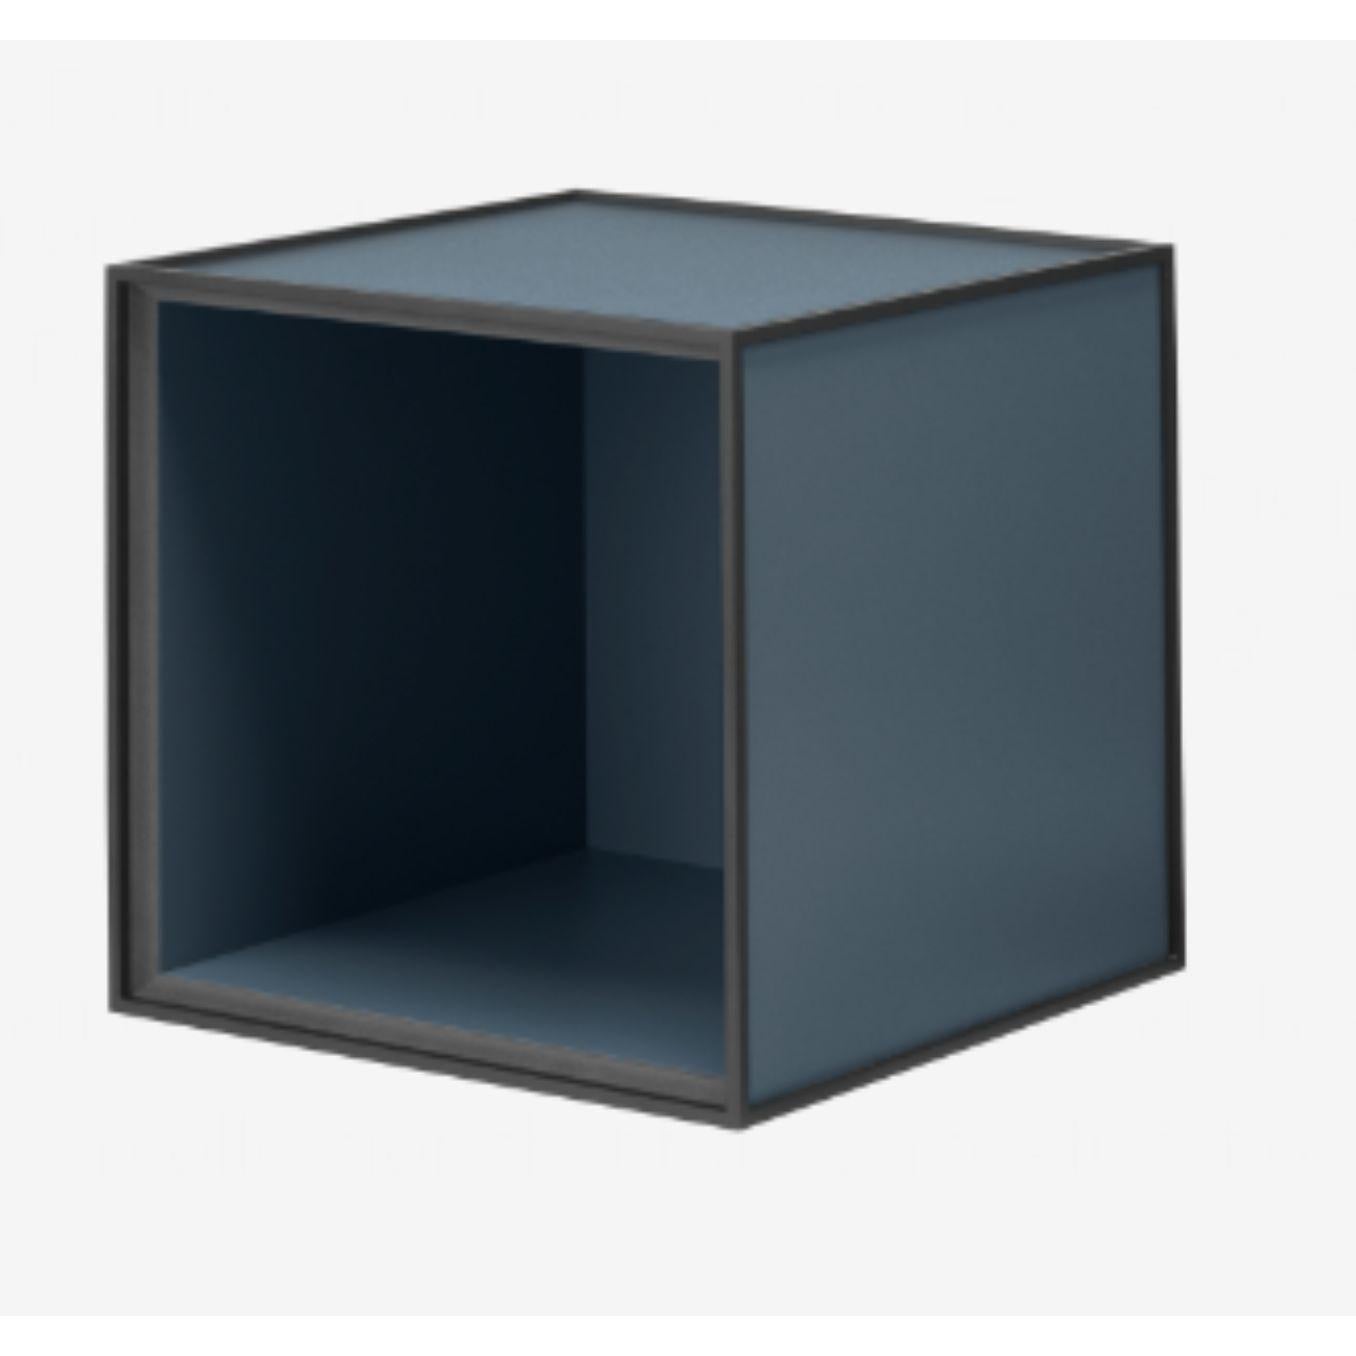 35 Fjord frame box by Lassen
Dimensions: W 35 x D 35 x H 35 cm 
Materials: Finér, Melamin, Melamin, Melamine, Metal, Veneer, Oak
Also available in different colors and dimensions. 

By Lassen is a Danish design brand focused on iconic designs